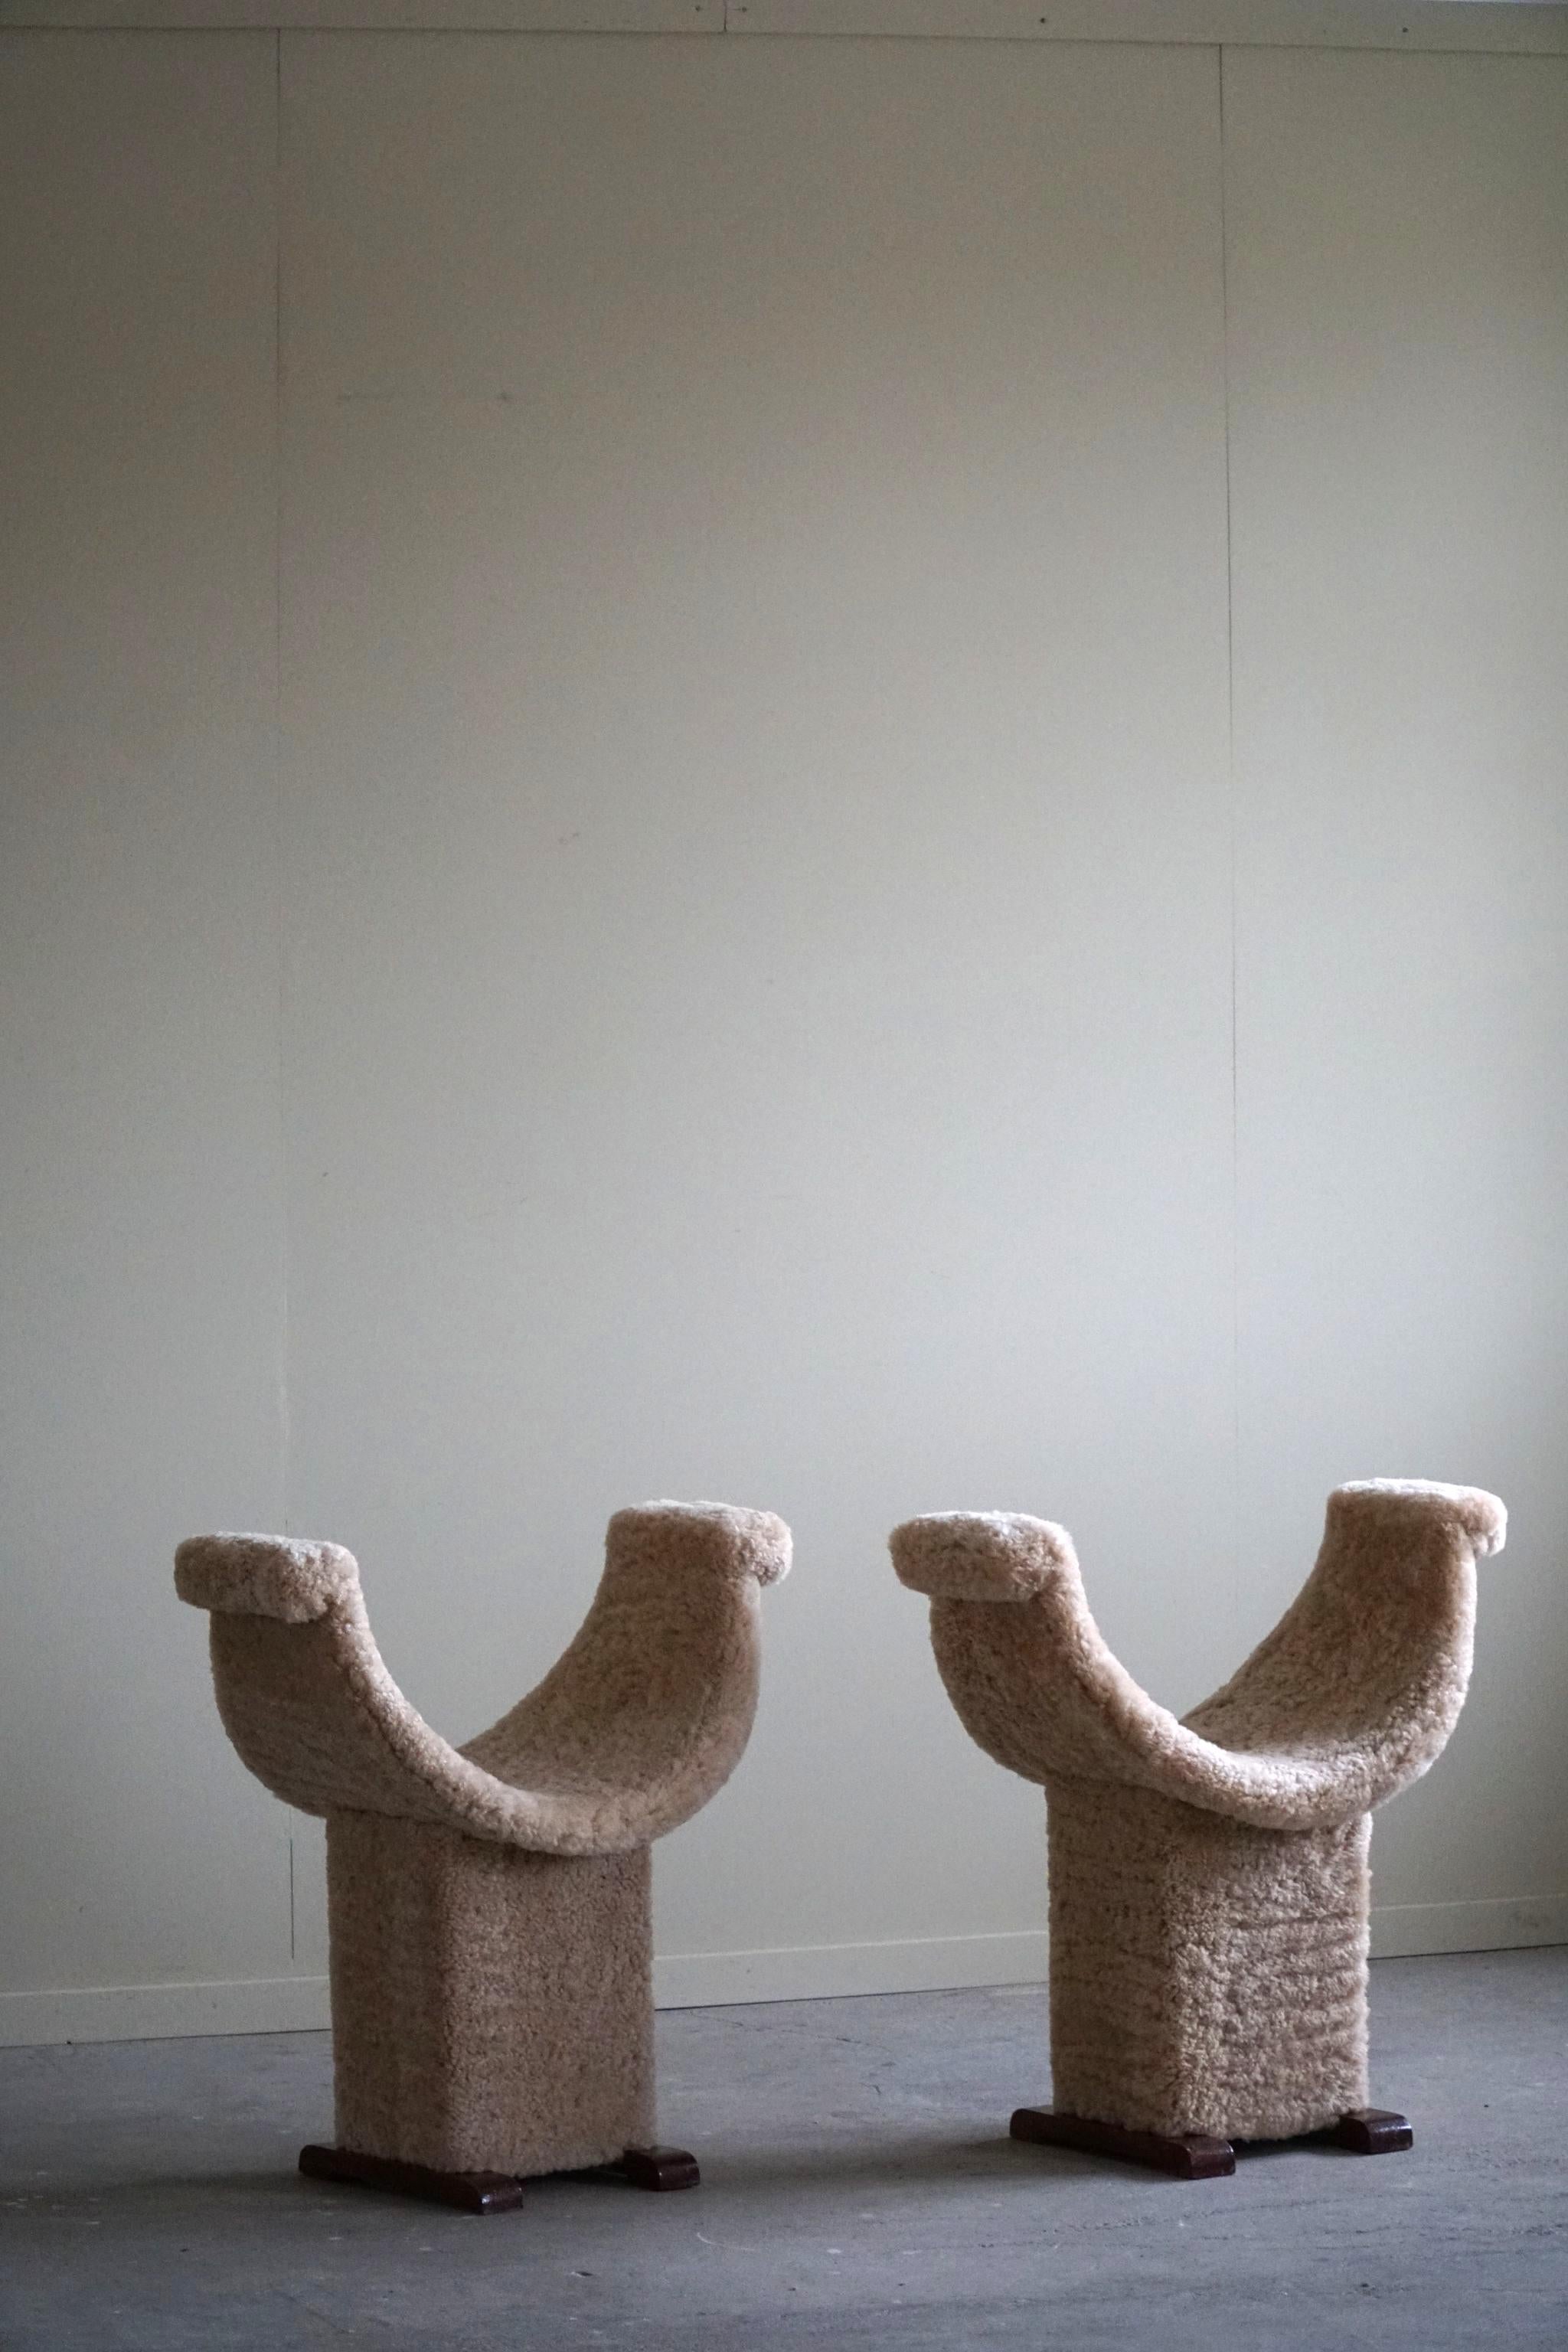 A Pair of Sculptural Stools, Reupholstered in Lambswool, Spanish Modern, 1940s For Sale 1